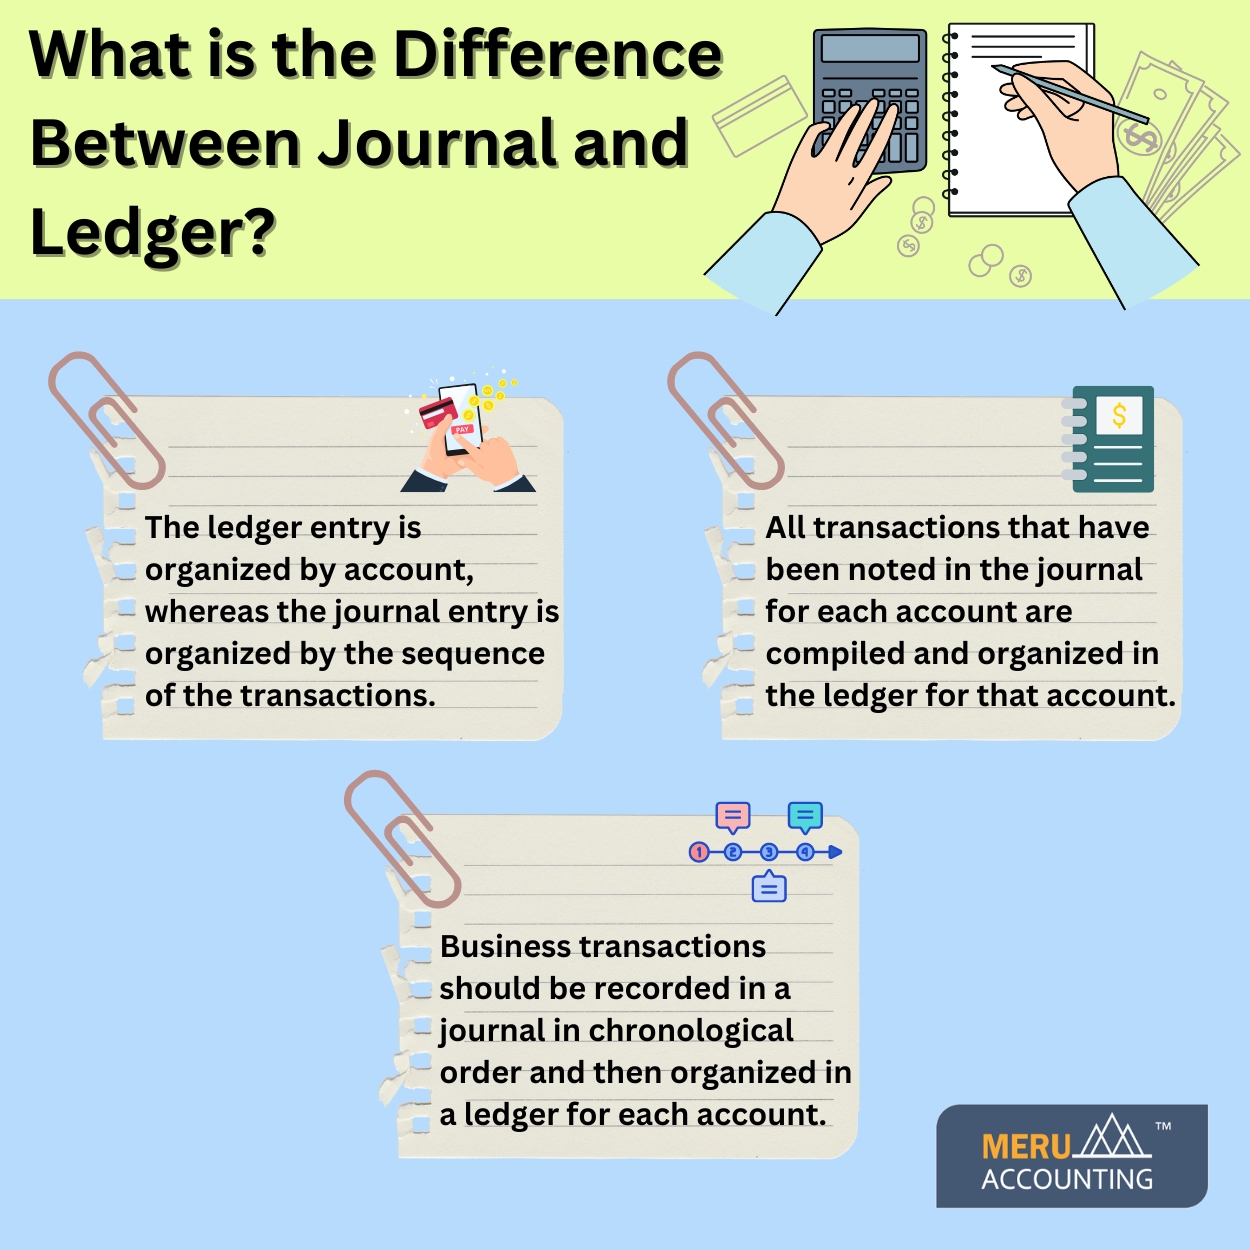 What is the Difference Between Journal and Ledger size 1250 by 1250 v1